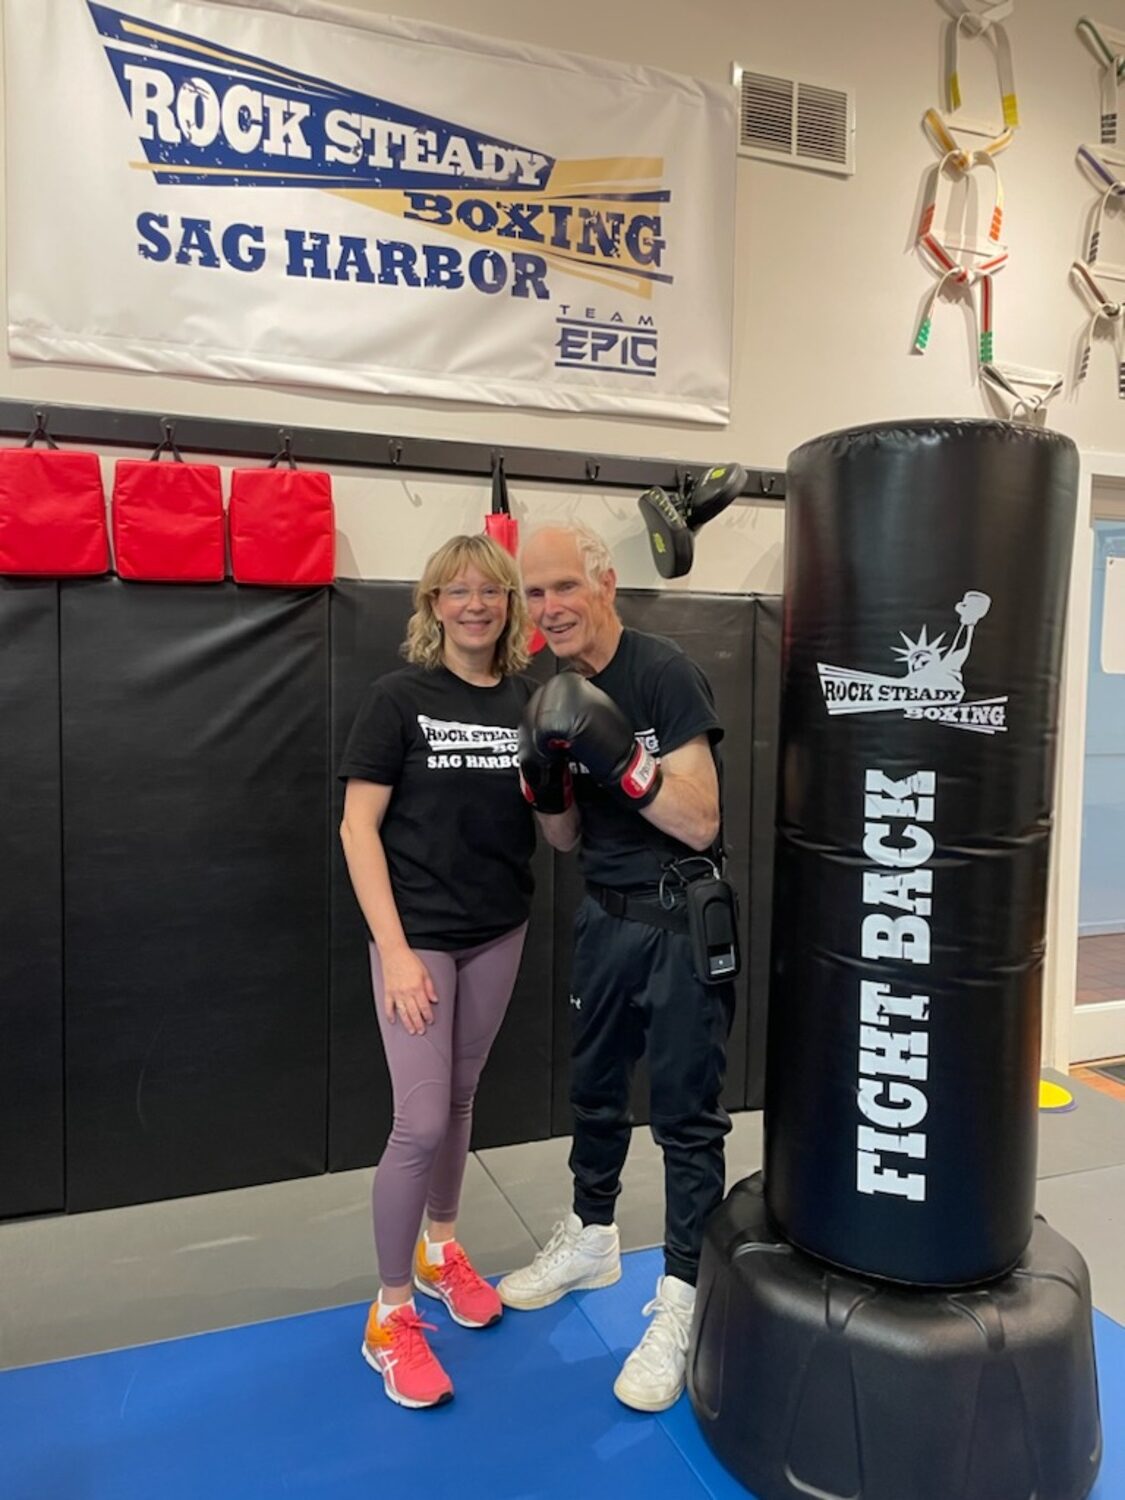 Kristin Davey, a volunteer with Rock Steady Boxing in Sag Harbor, and her father, Kelly King, who has participated in the program since its inception in 2017. MICHELLE DEL GIORNO